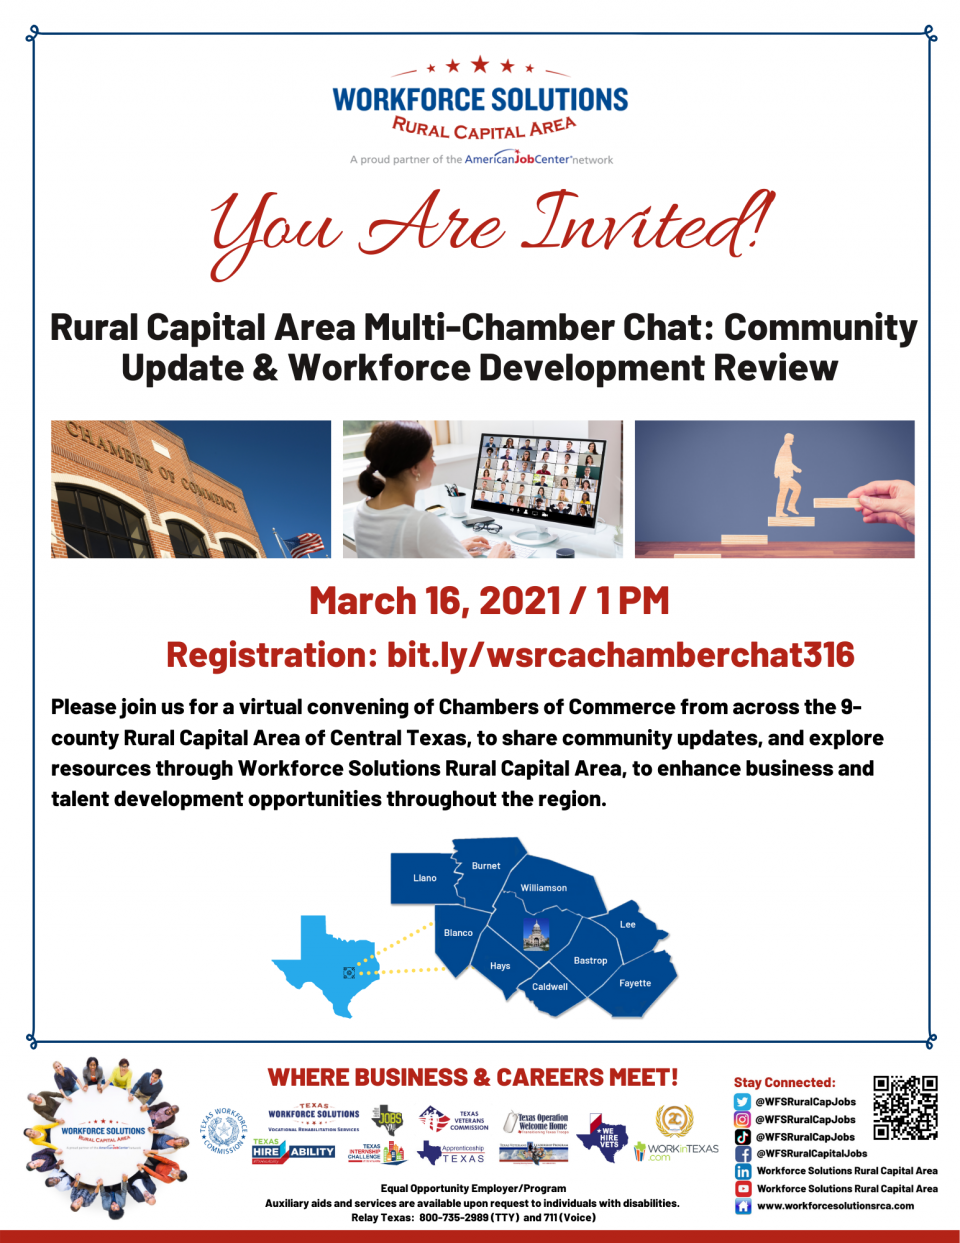 Workforce Solutions Rural Capital Area to Host Multi-Chamber Chat